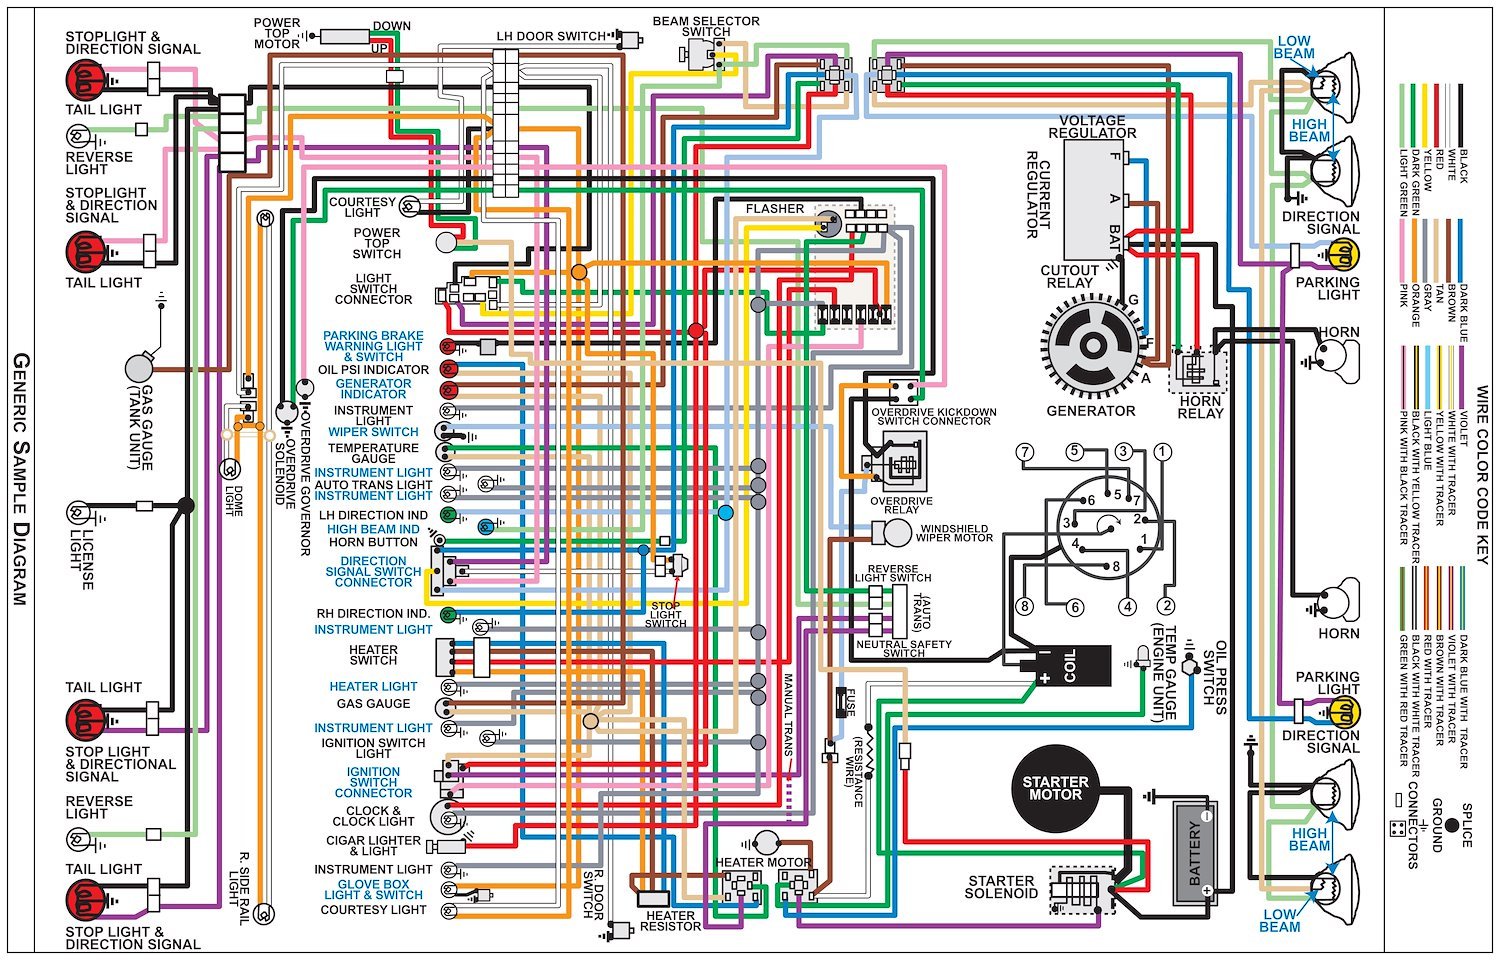 Wiring Diagram for 1961 GMC Truck, 11 in. x 17 in., Laminated